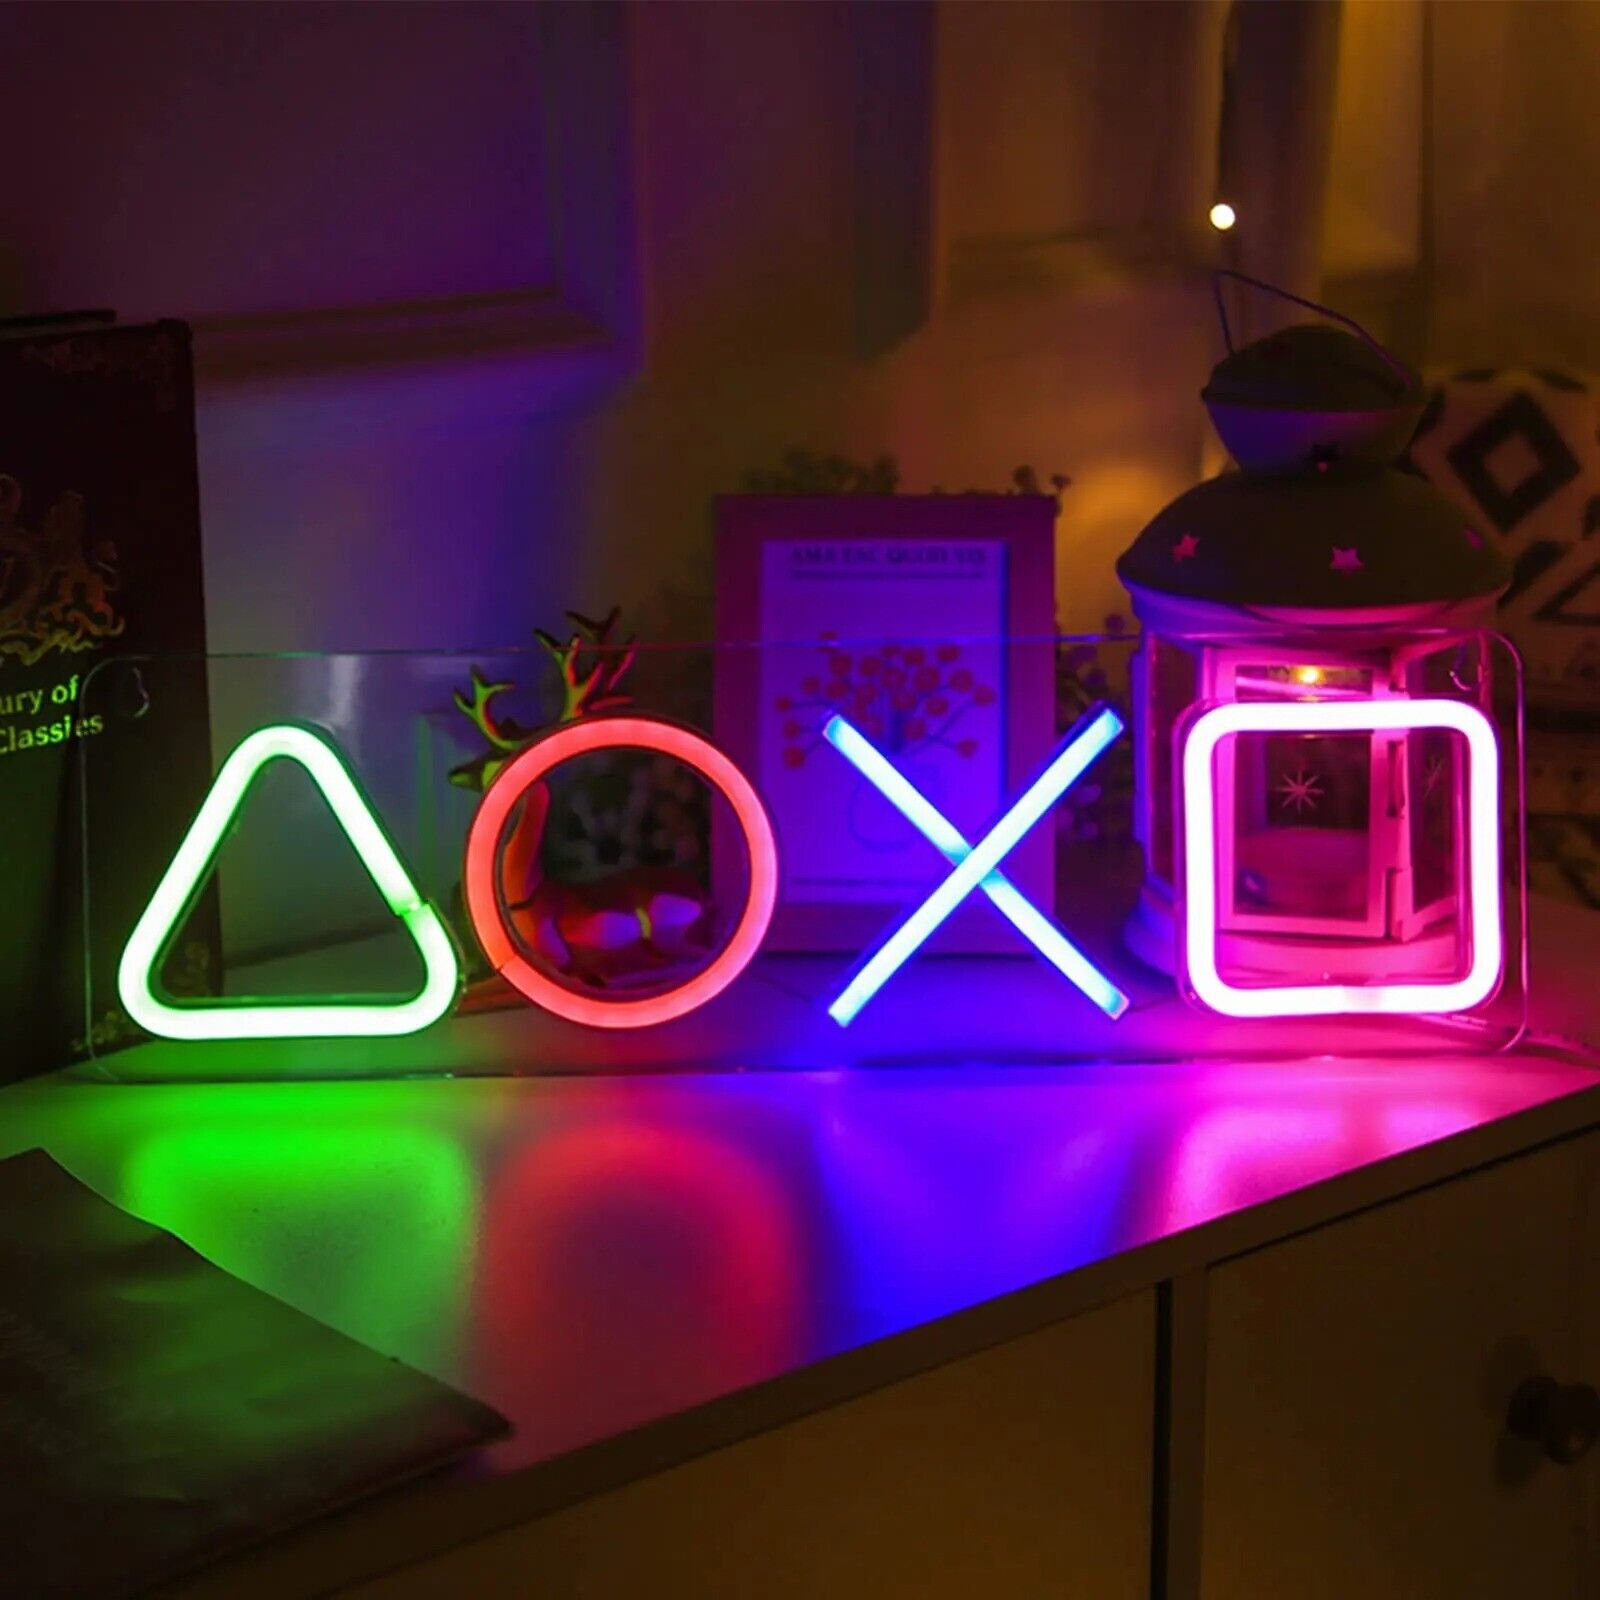 NEW LED Playstation Video Game Room Light Neon USB Powered Sign for Wall Decor